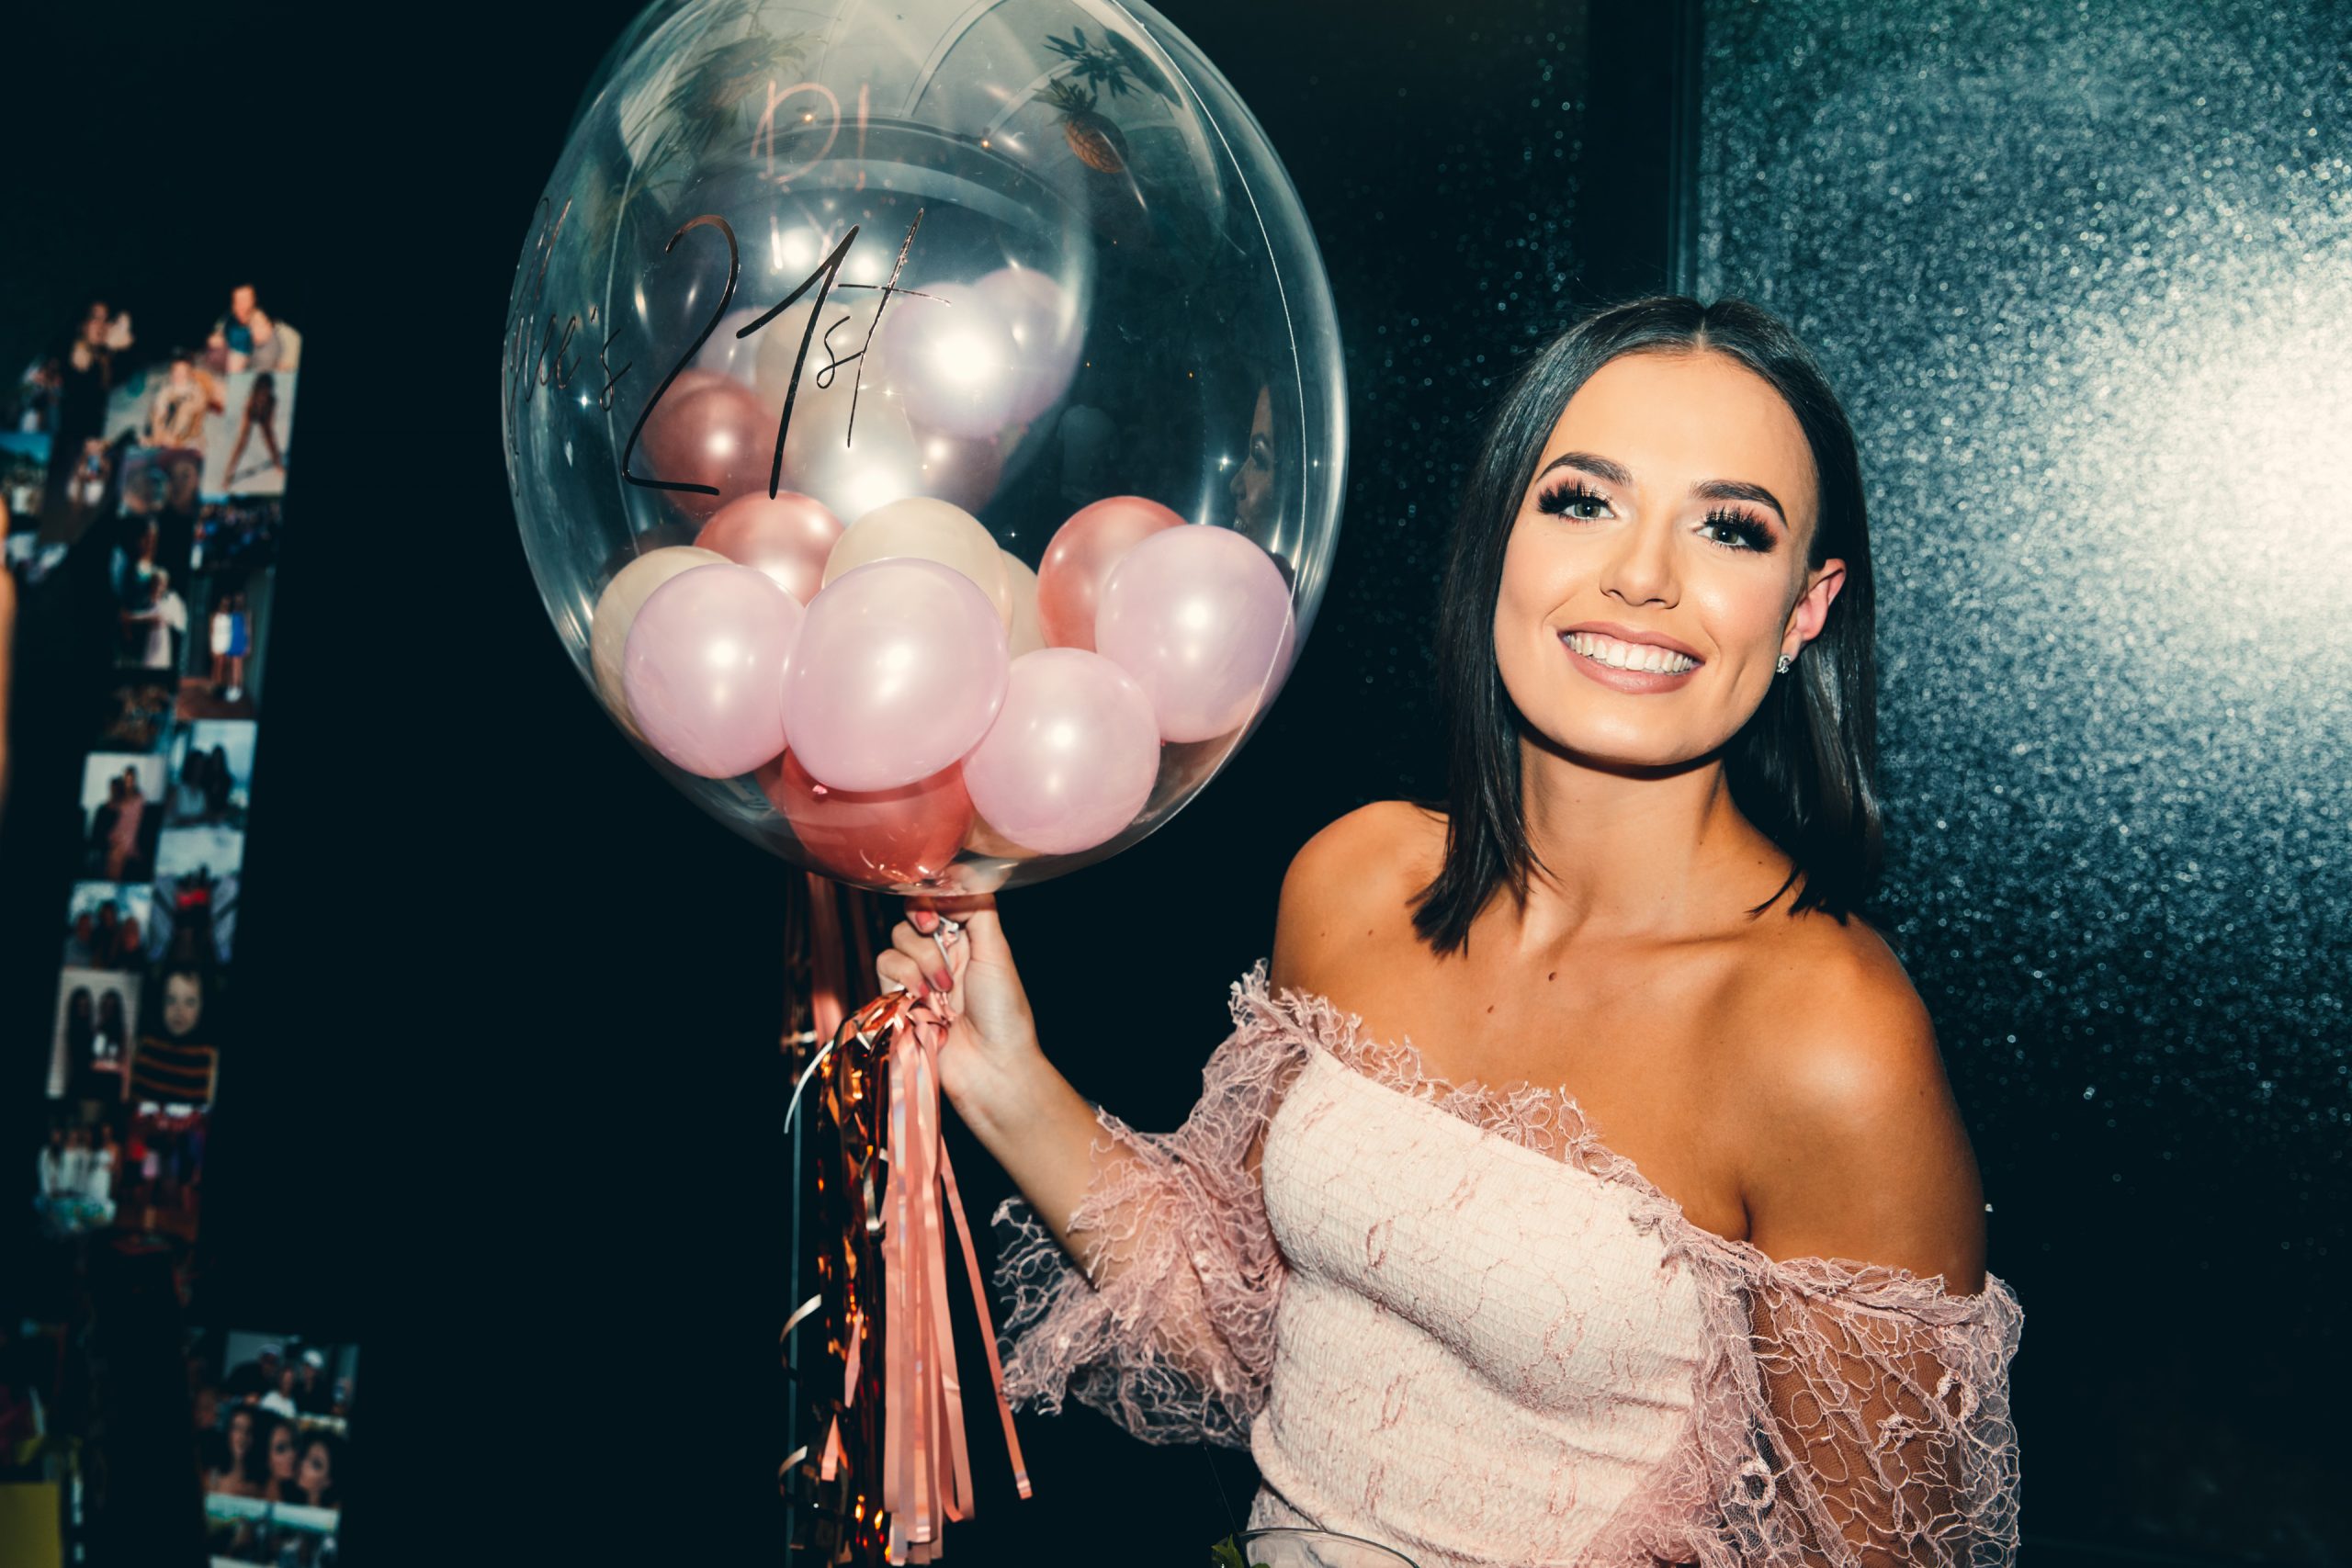 rylee's 21st birthday - event photography at highfield caringbah